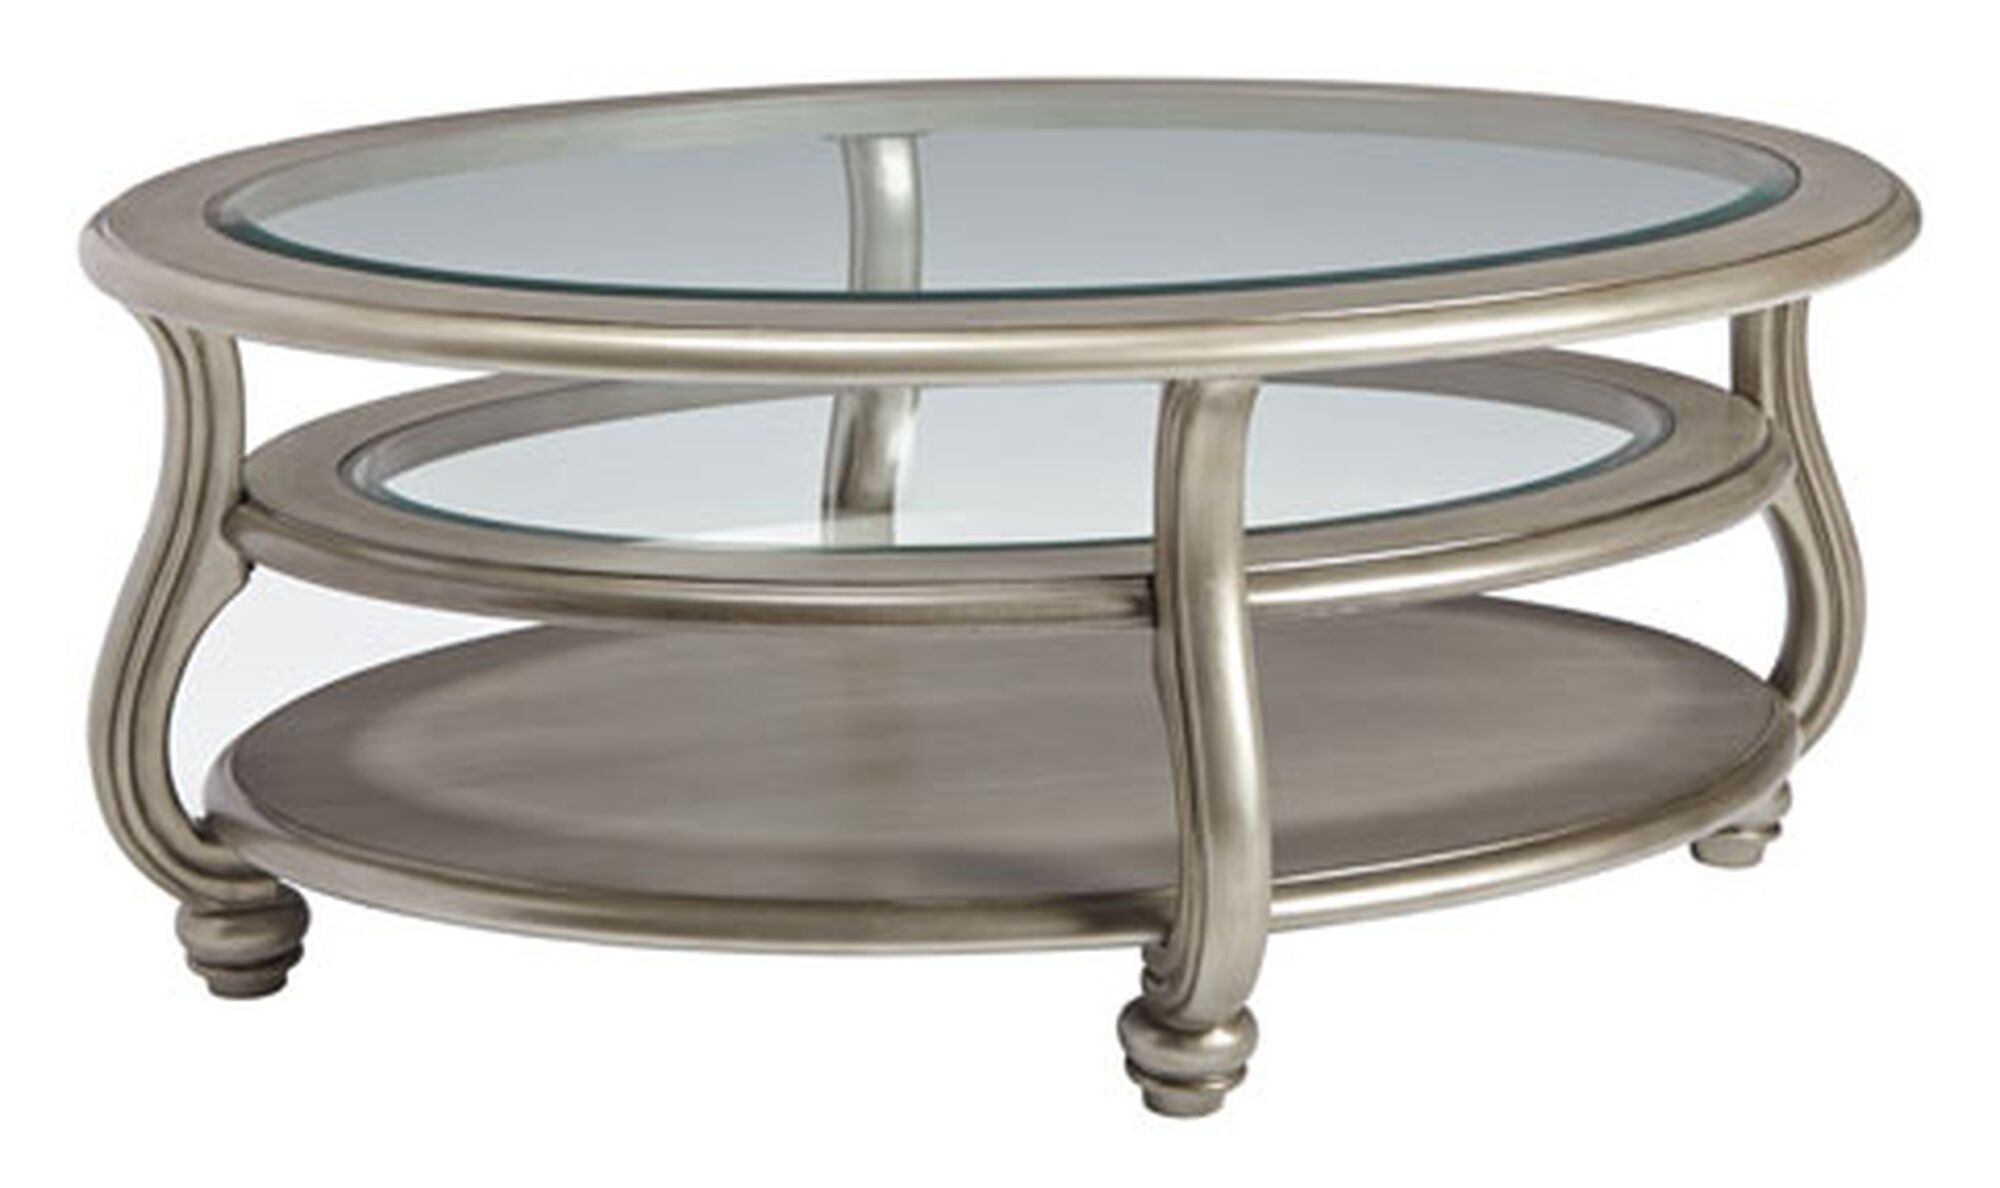 Two-Tiered Traditional Oval Cocktail Table in Silver | Mathis Brothers